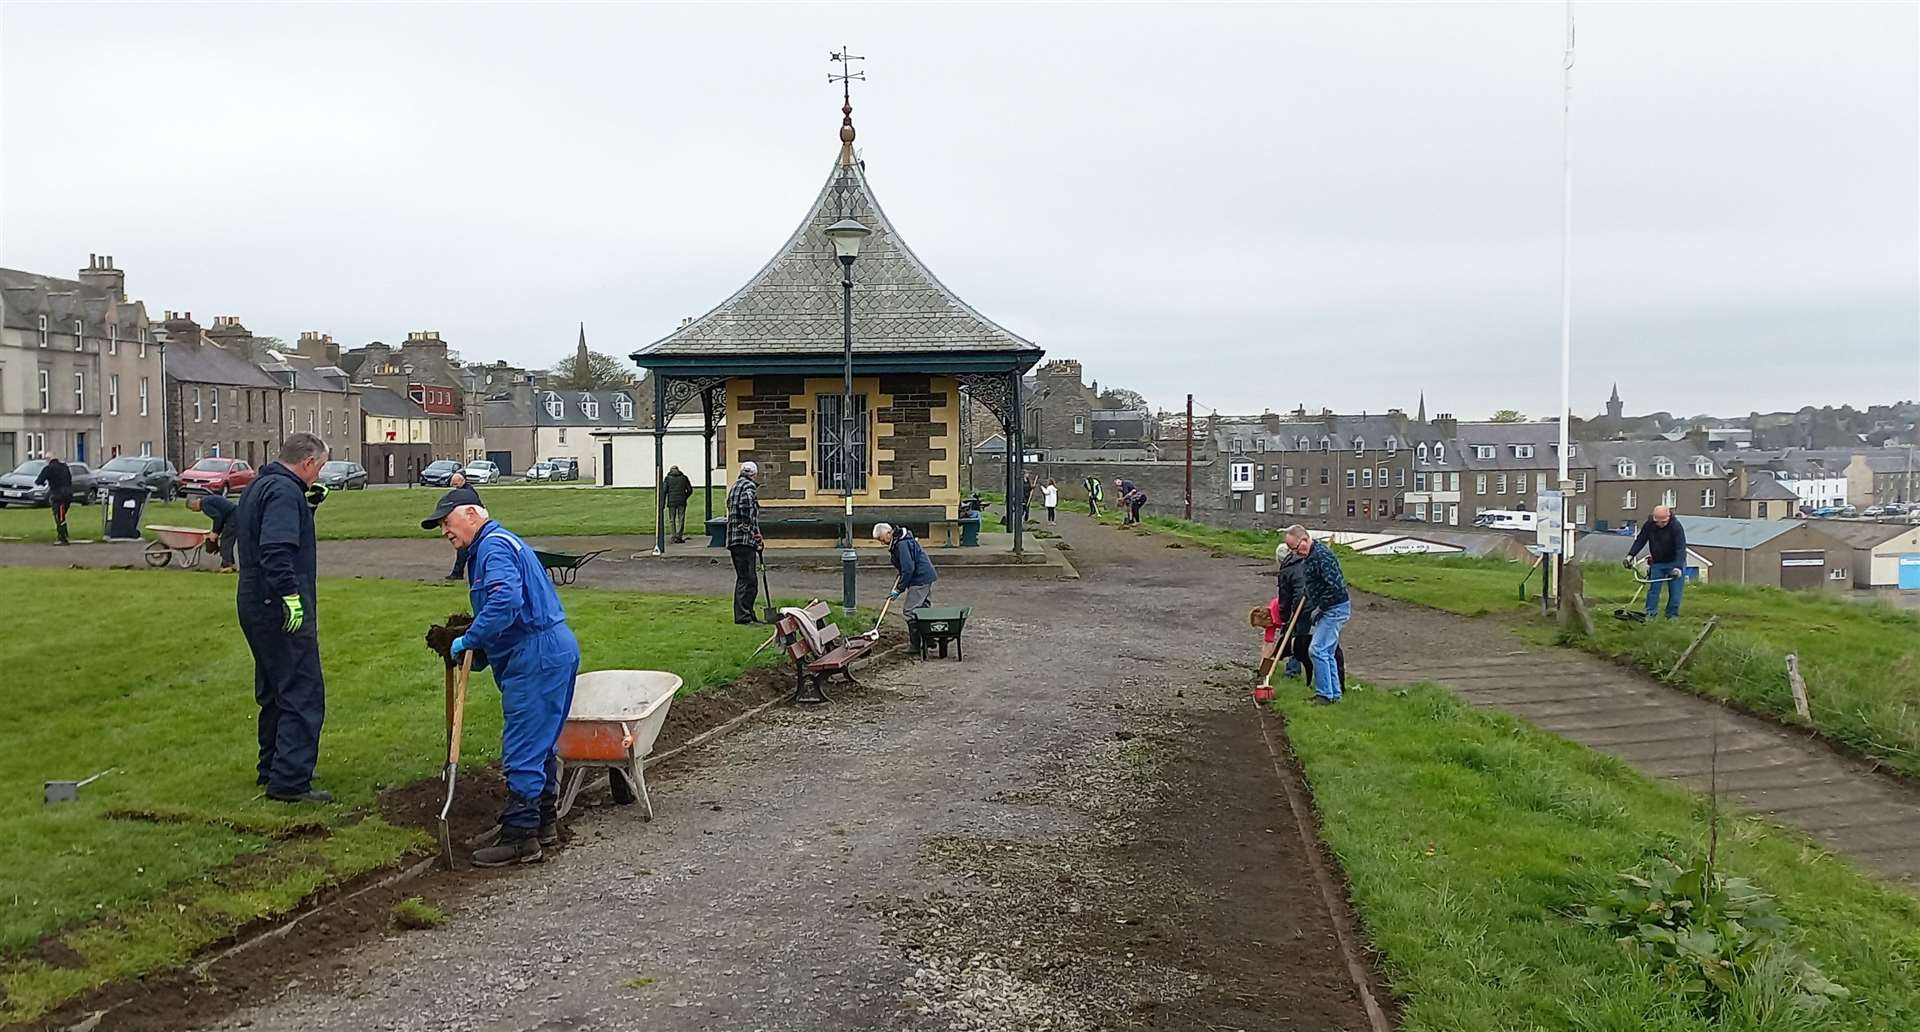 Hard-work volunteers carried out weeding, straightening of verges, litter-picking and other tasks ahead of the event on Saturday.